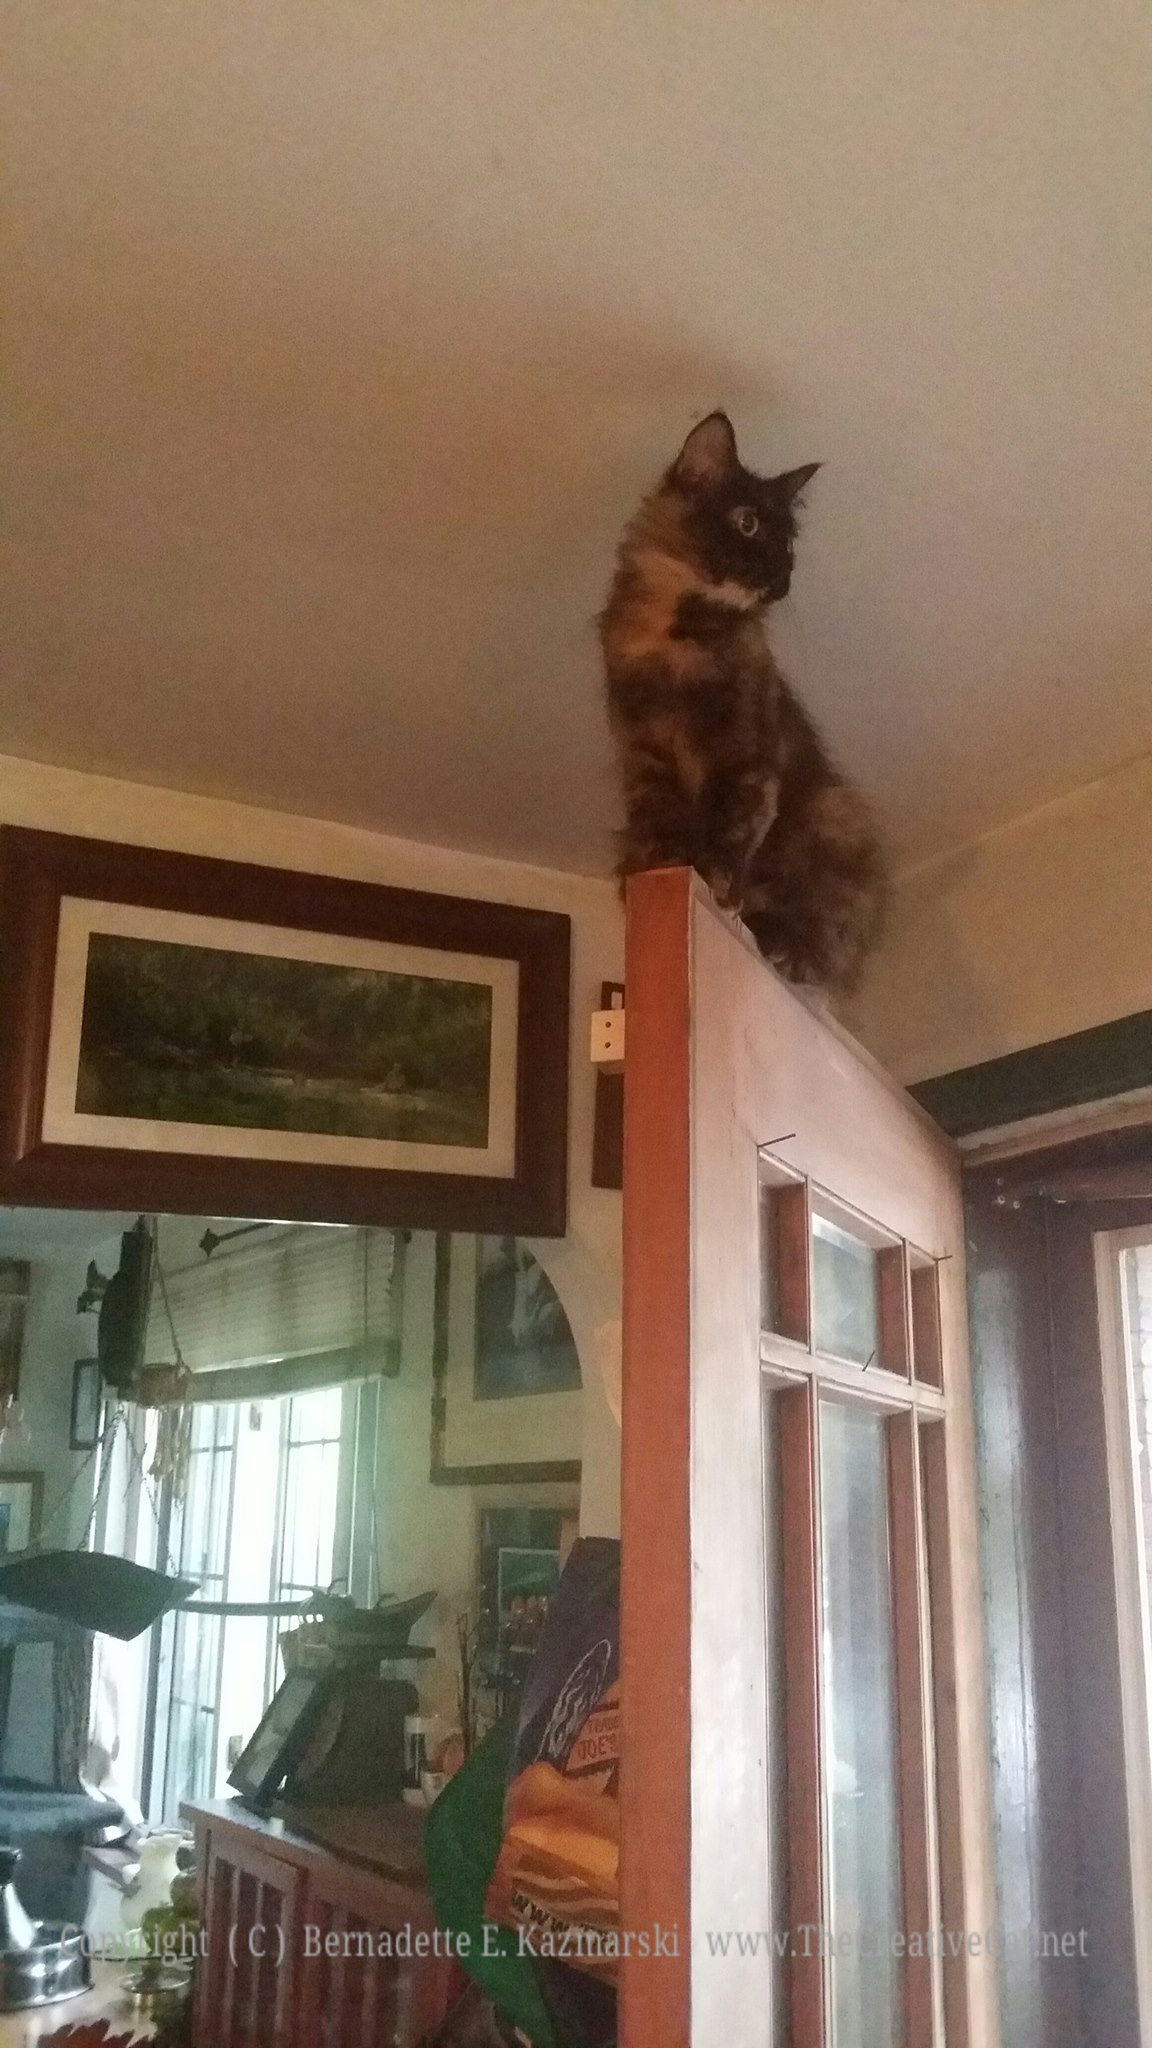 Just try to get me up here.